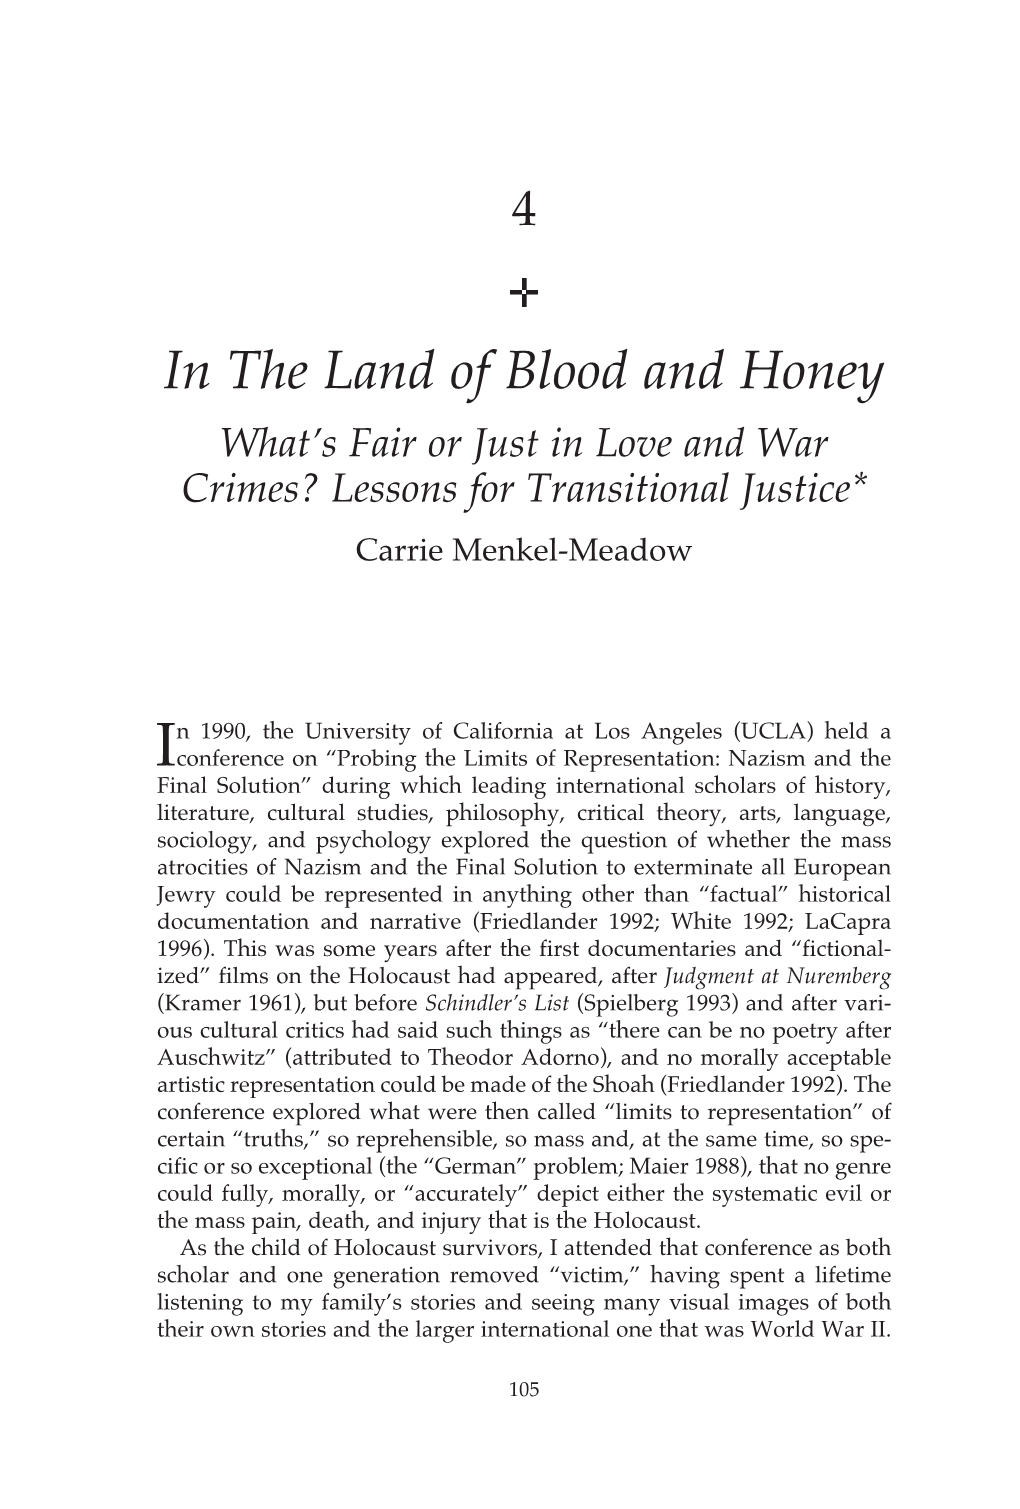 In the Land of Blood and Honey What’S Fair Or Just in Love and War Crimes? Lessons for Transitional Justice* Carrie Menkel-Meadow